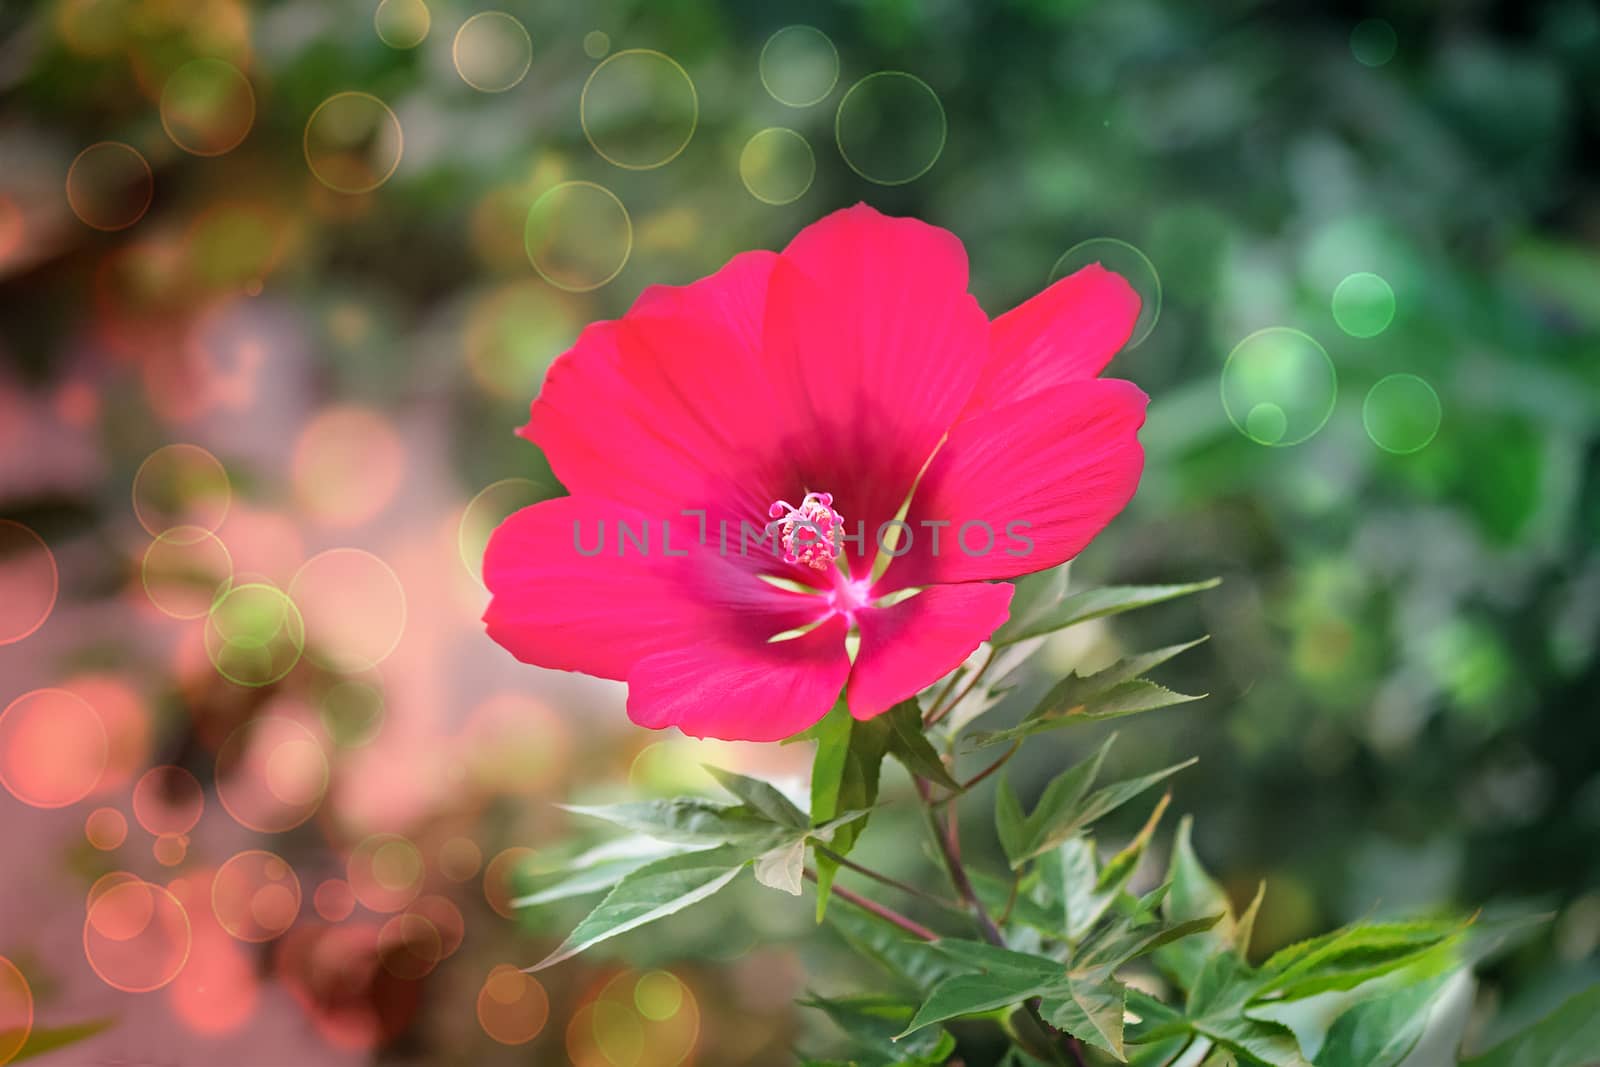 Large bright red flower on a background of green plants. Presents closeup.